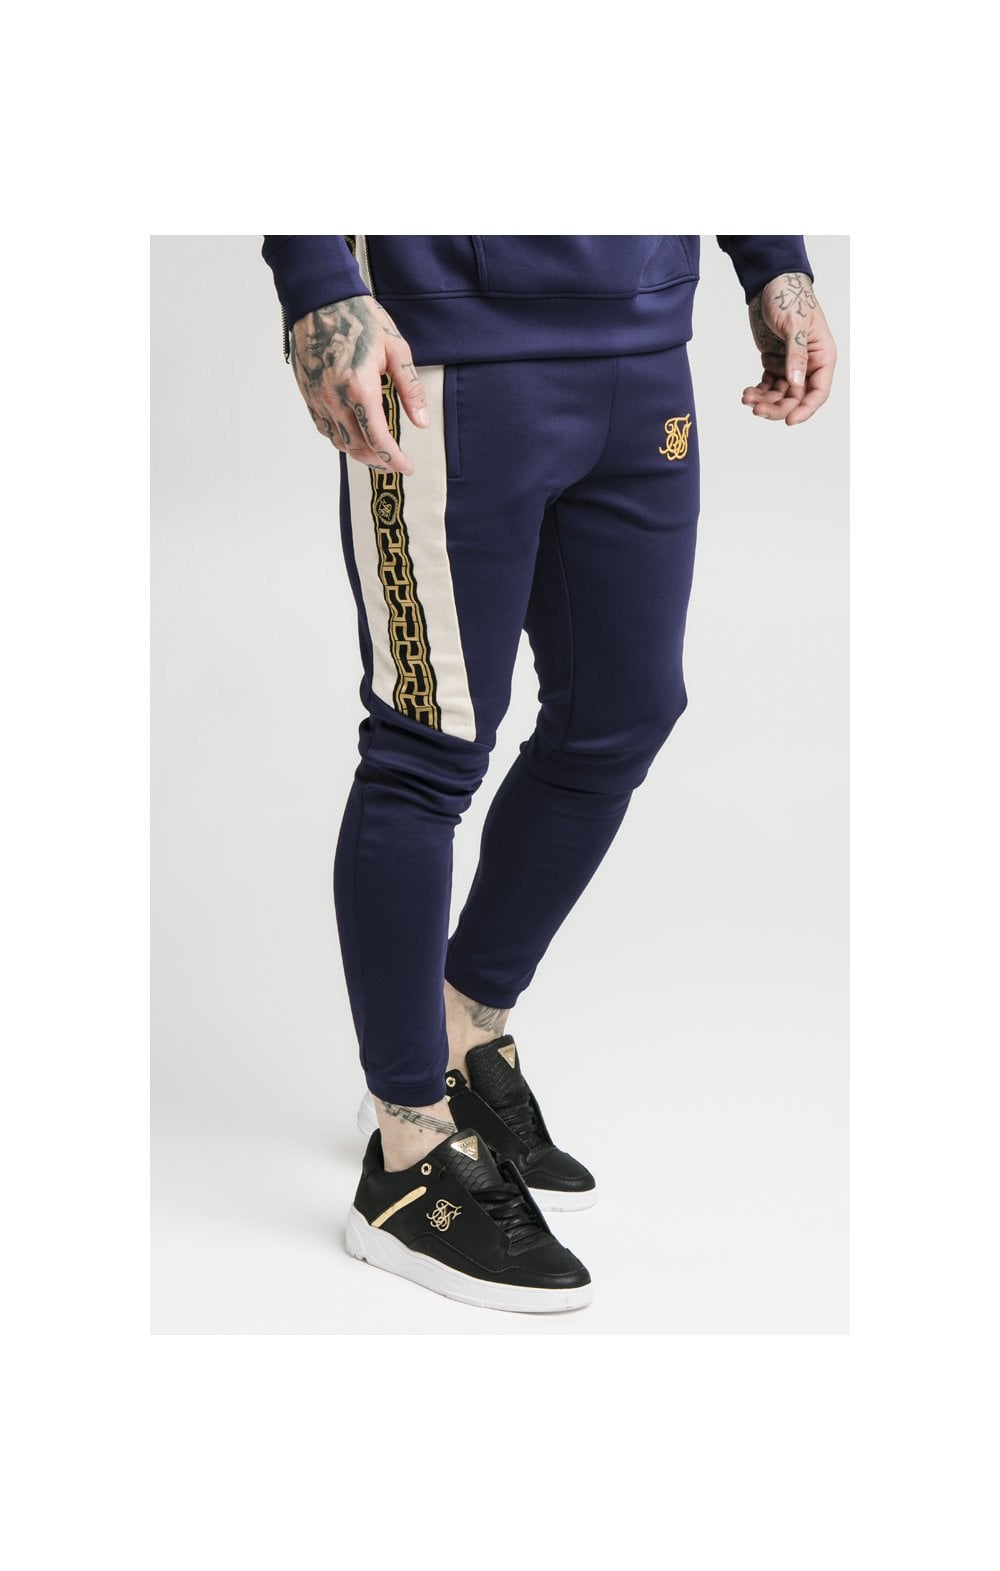 Load image into Gallery viewer, SikSilk hybrid Panel Taped Pants – Navy (1)